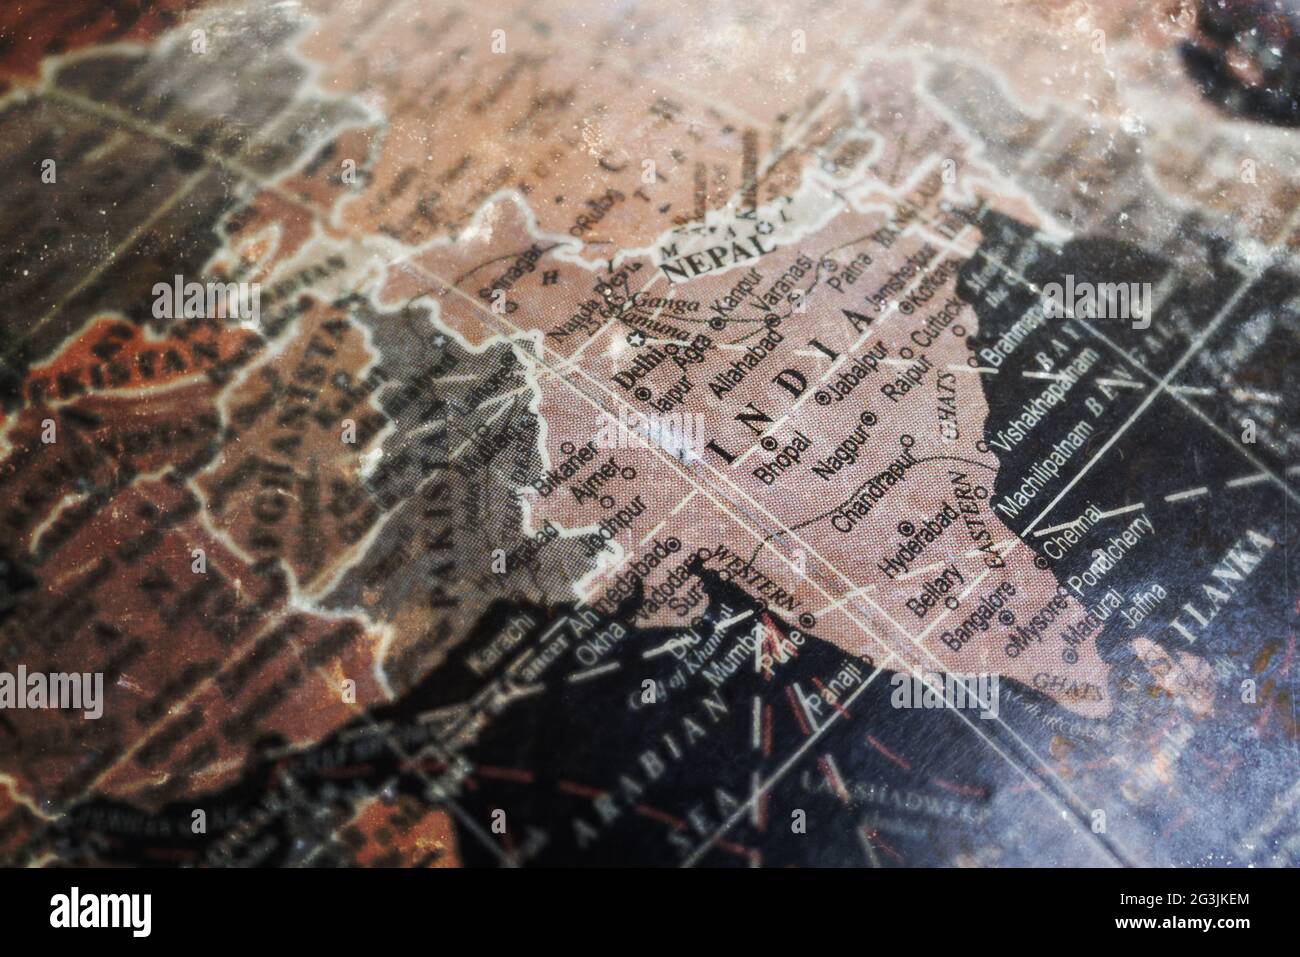 India map on vintage crack paper background Stock Photo